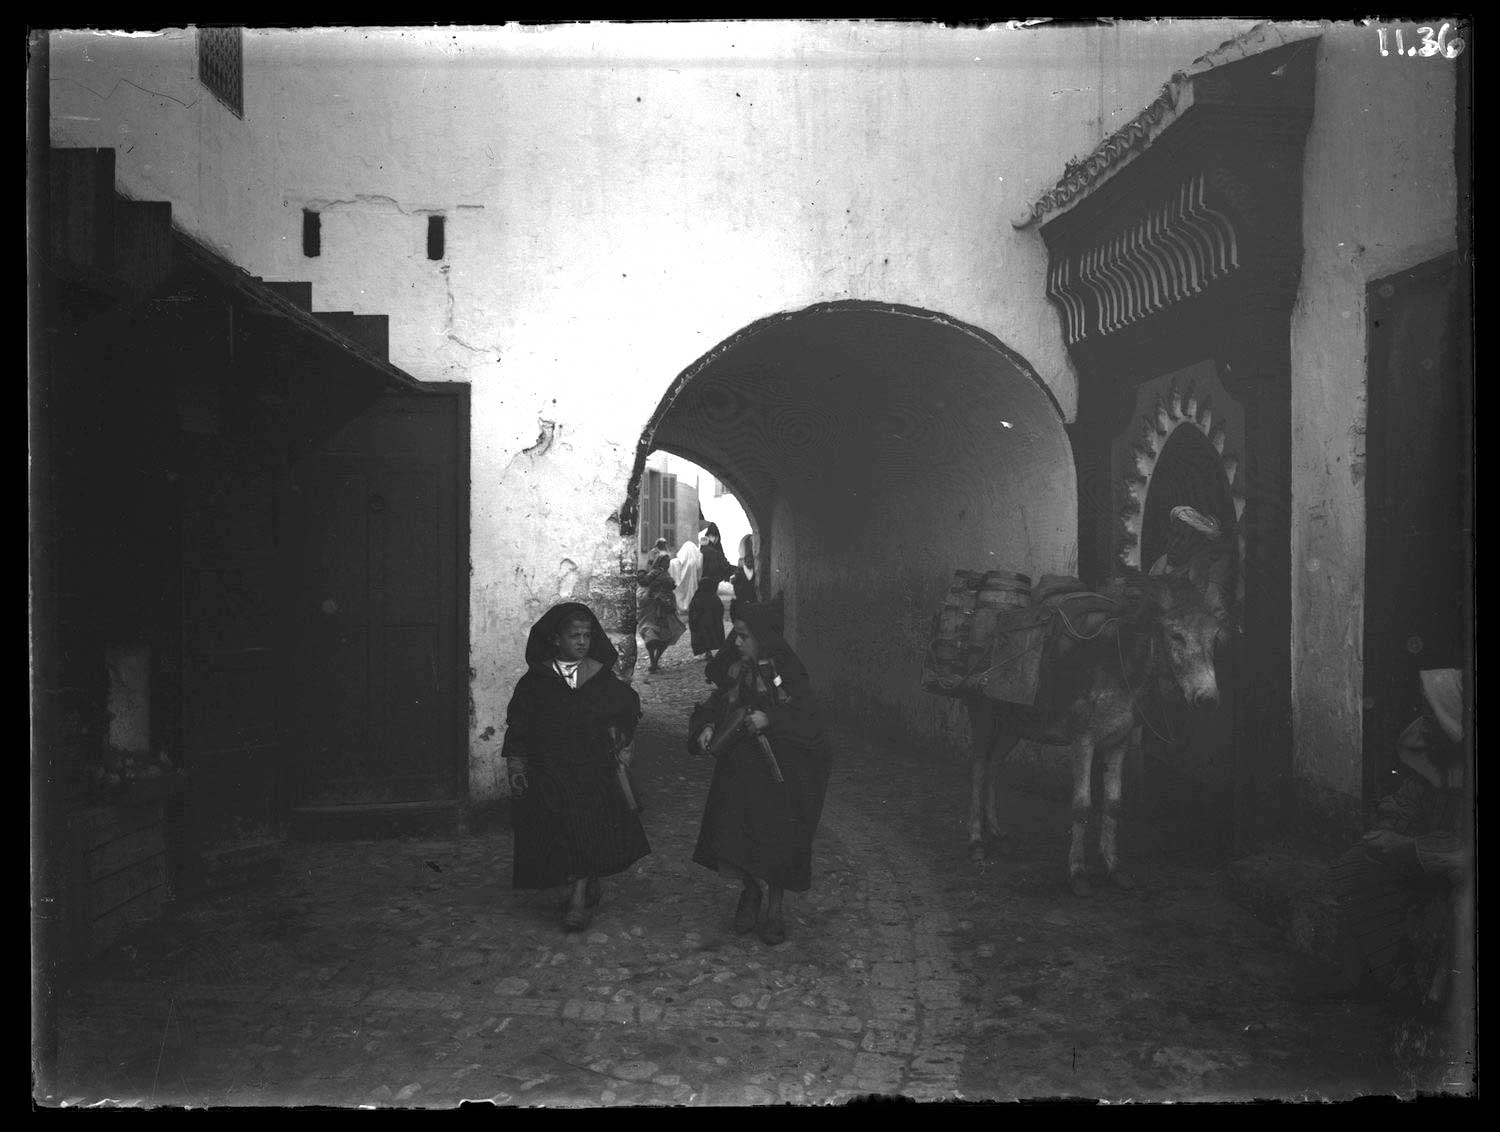 Two boys in cloaks walk through the gare; at right a donkey stands by the portal of Sidi Ali Ben Daoud